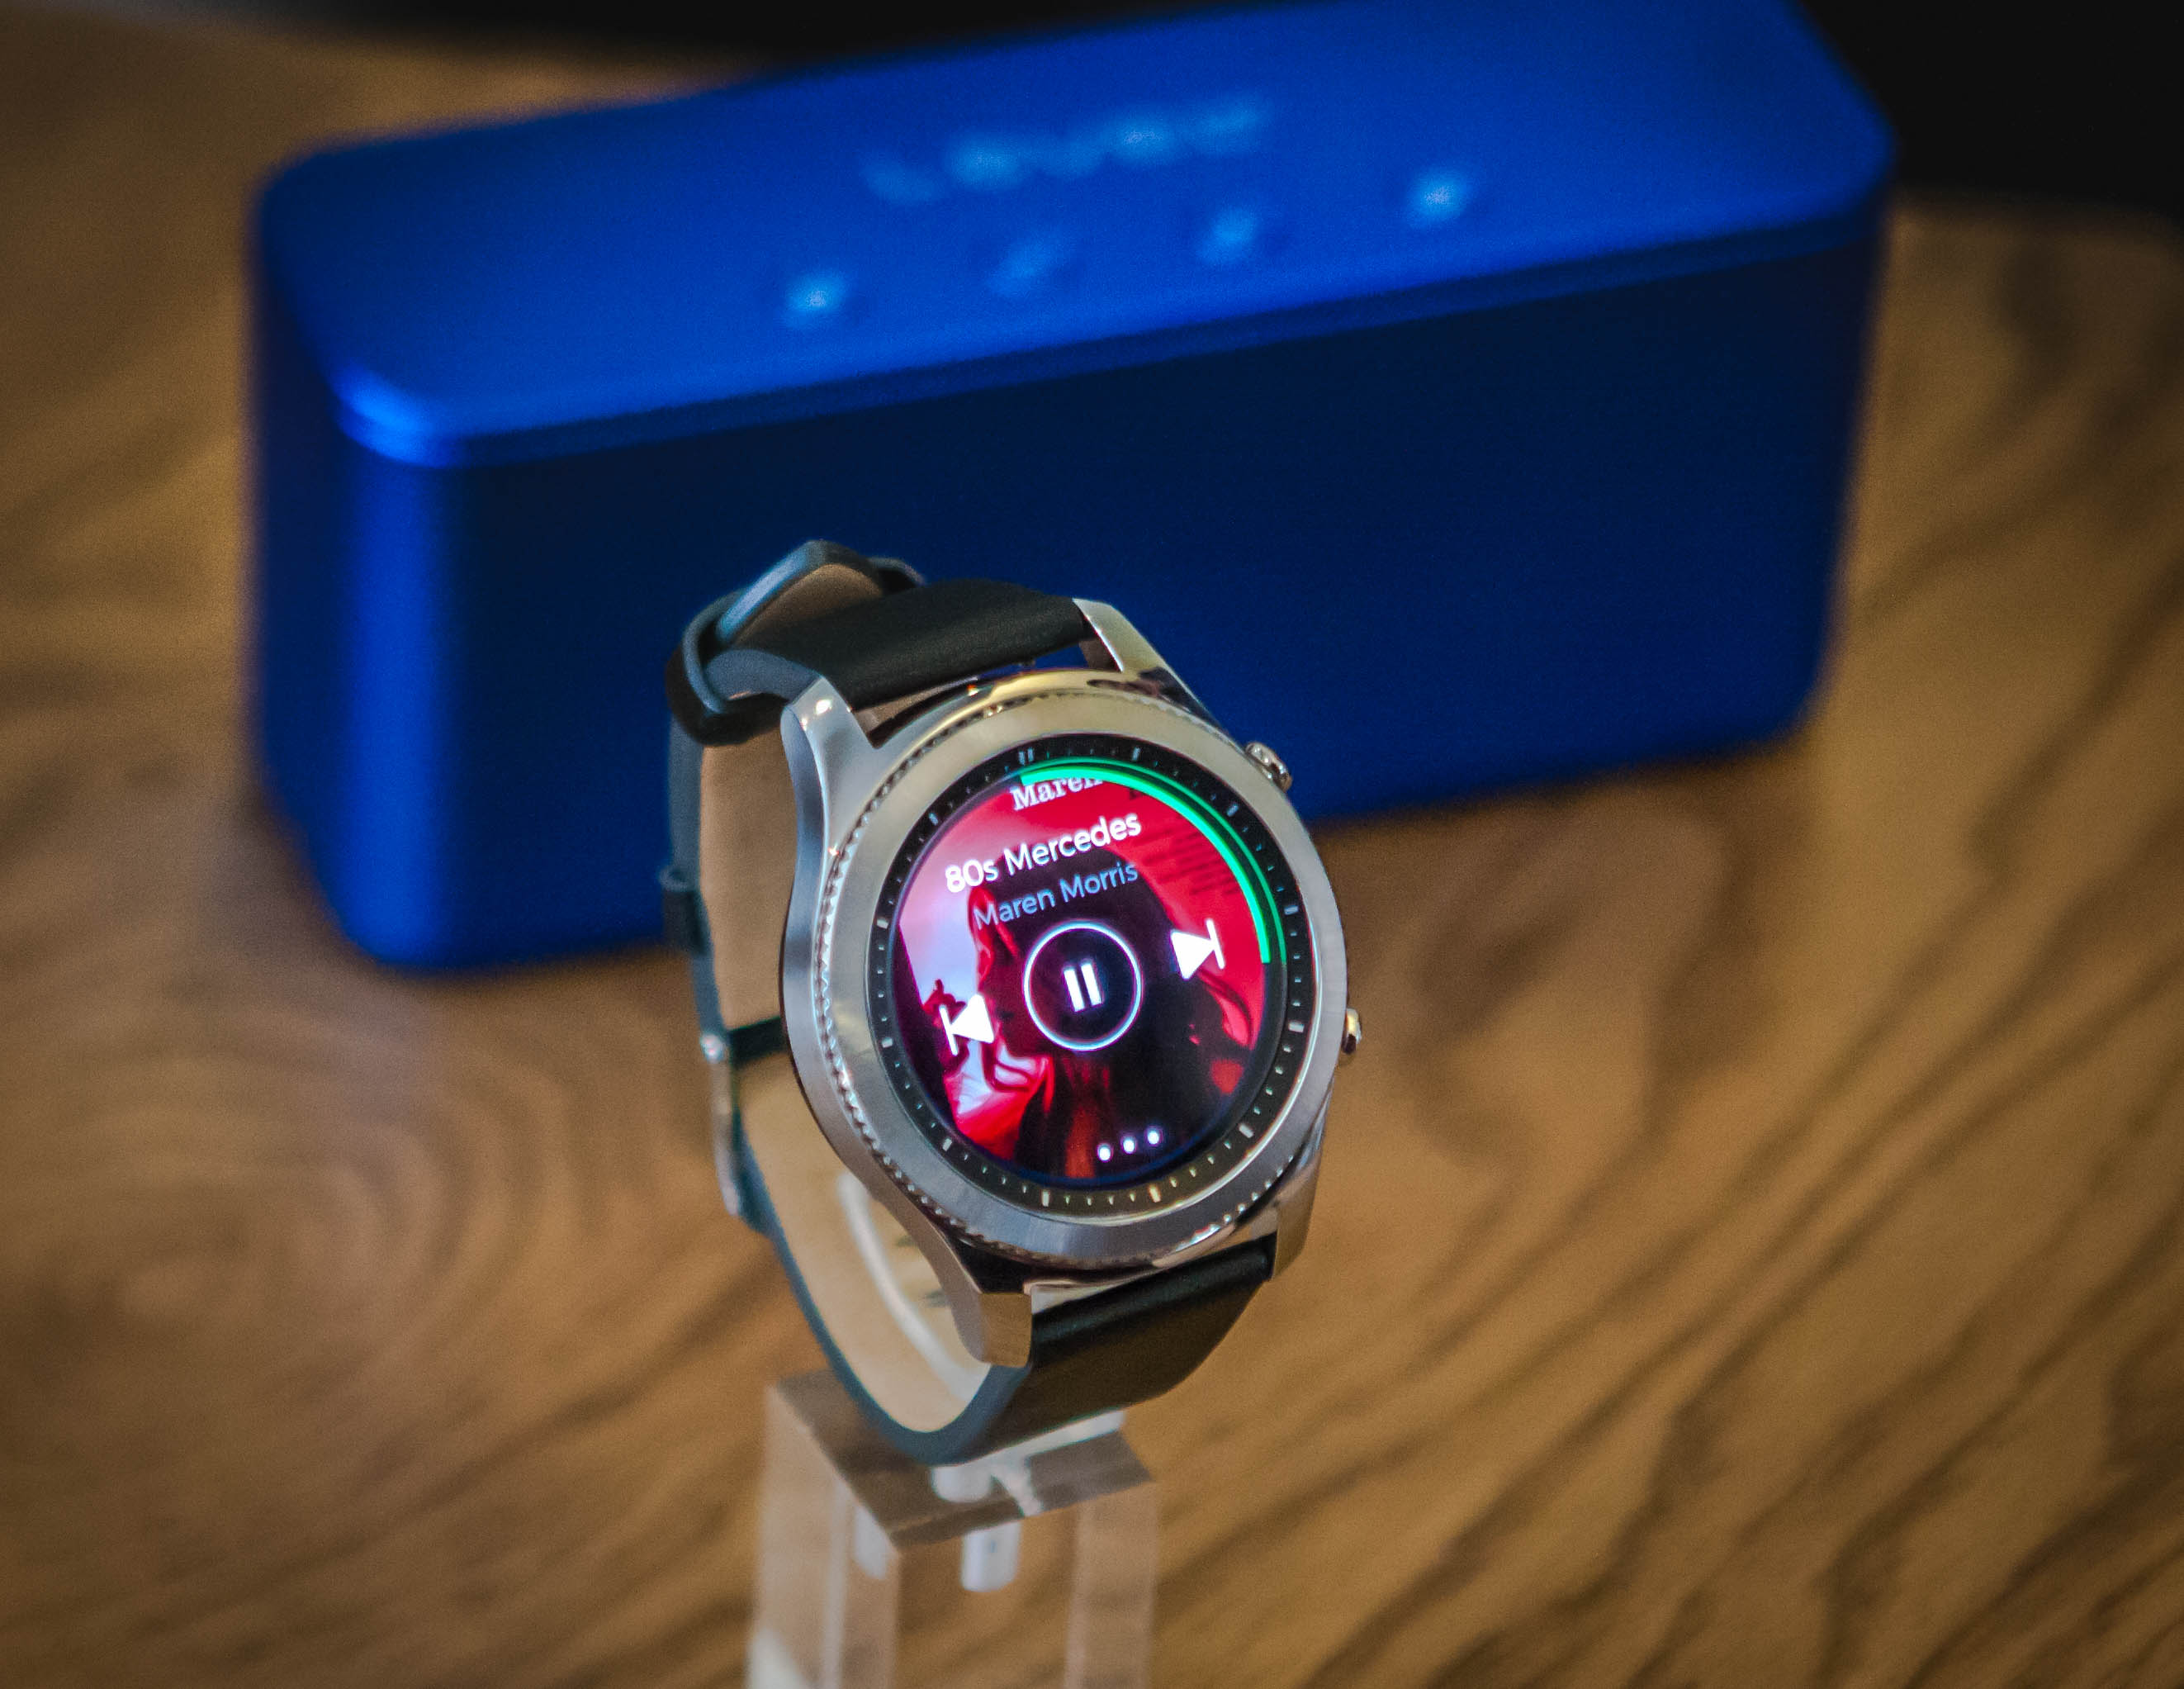 Playing Spotify music through the Samsung Gear S3 smartwatch